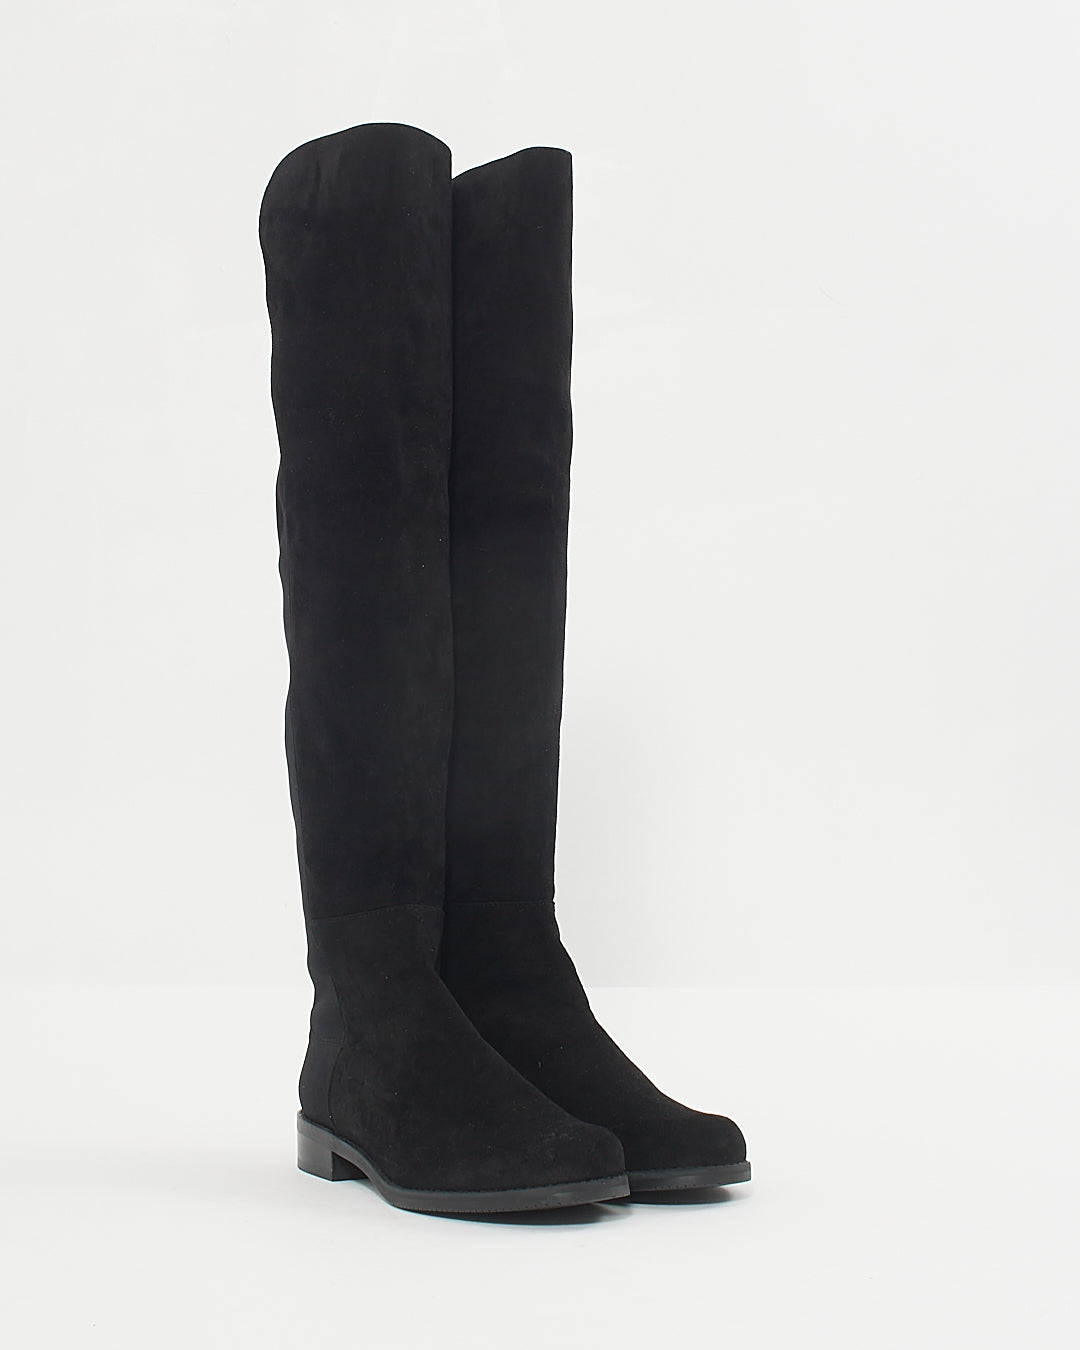 Stuart Weitzman Black Suede 50/50 Stretch Over-the-Knee Boots - 35.5